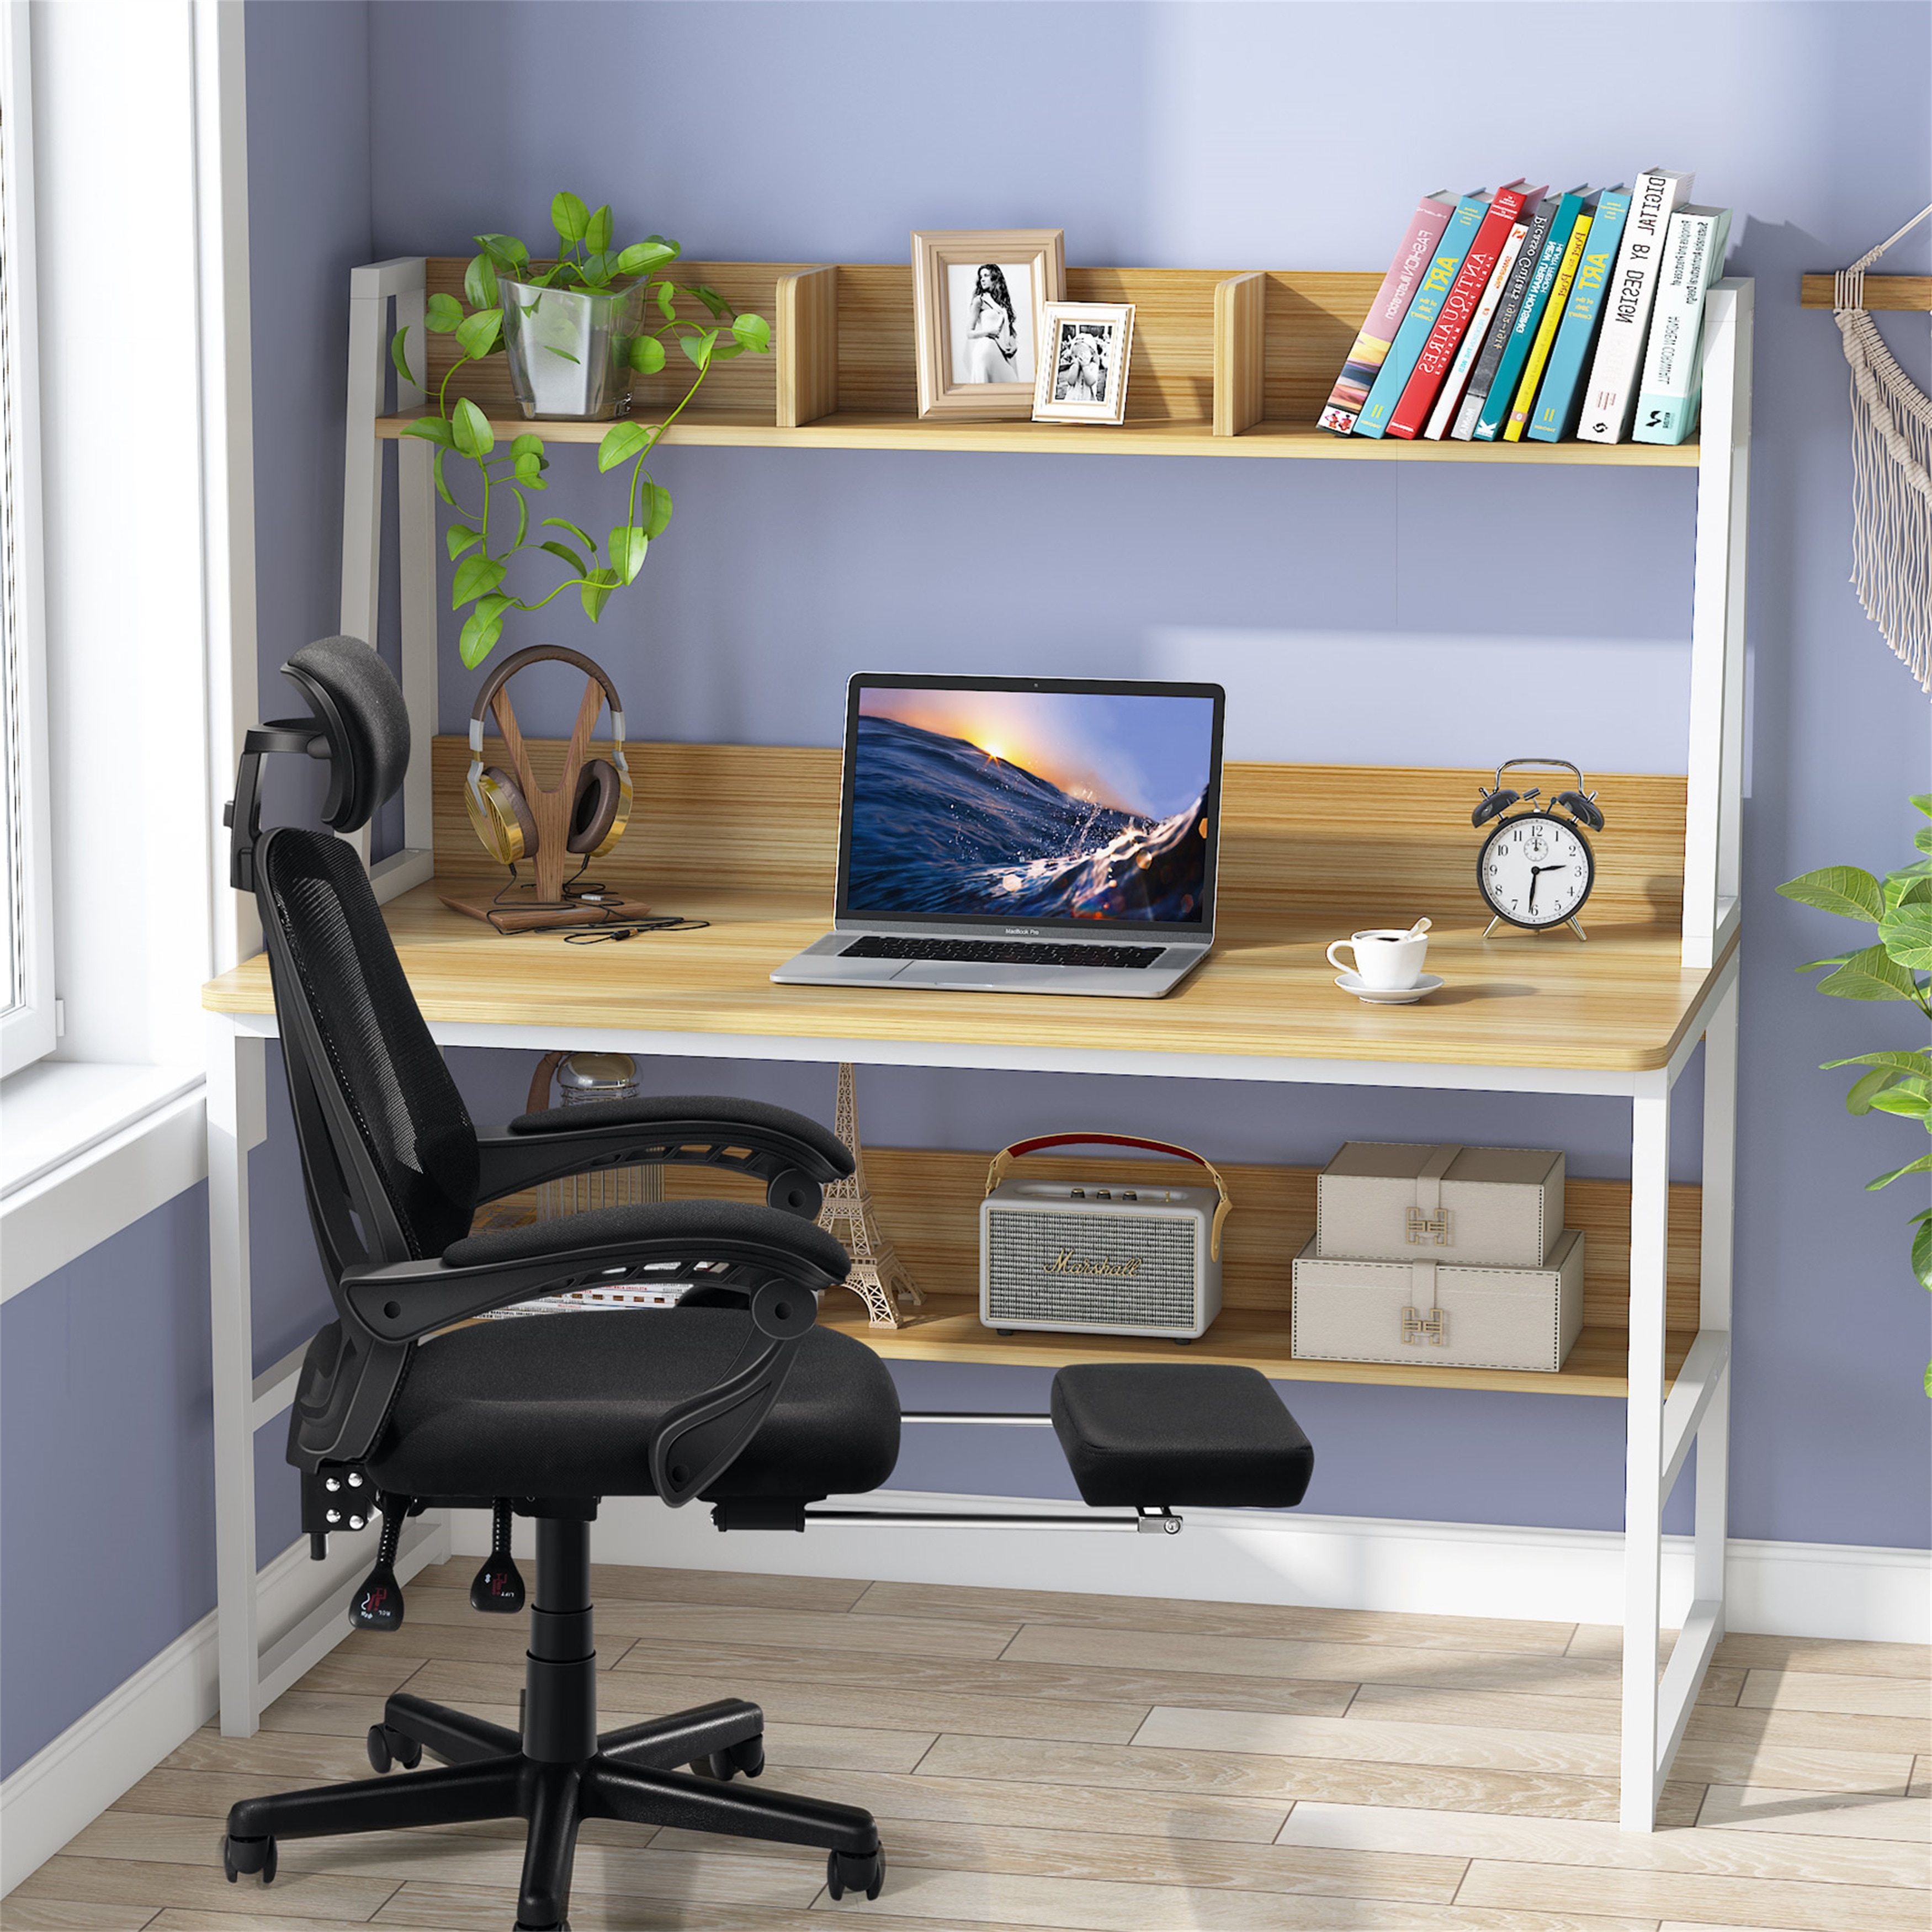 https://ak1.ostkcdn.com/images/products/is/images/direct/29be66d74d840de777f3f380438ebade422a95b5/47-Inches%C2%A0Computer-Desk-with-Hutch-and-Bookshelf%2C-Home-Office-Desk.jpg